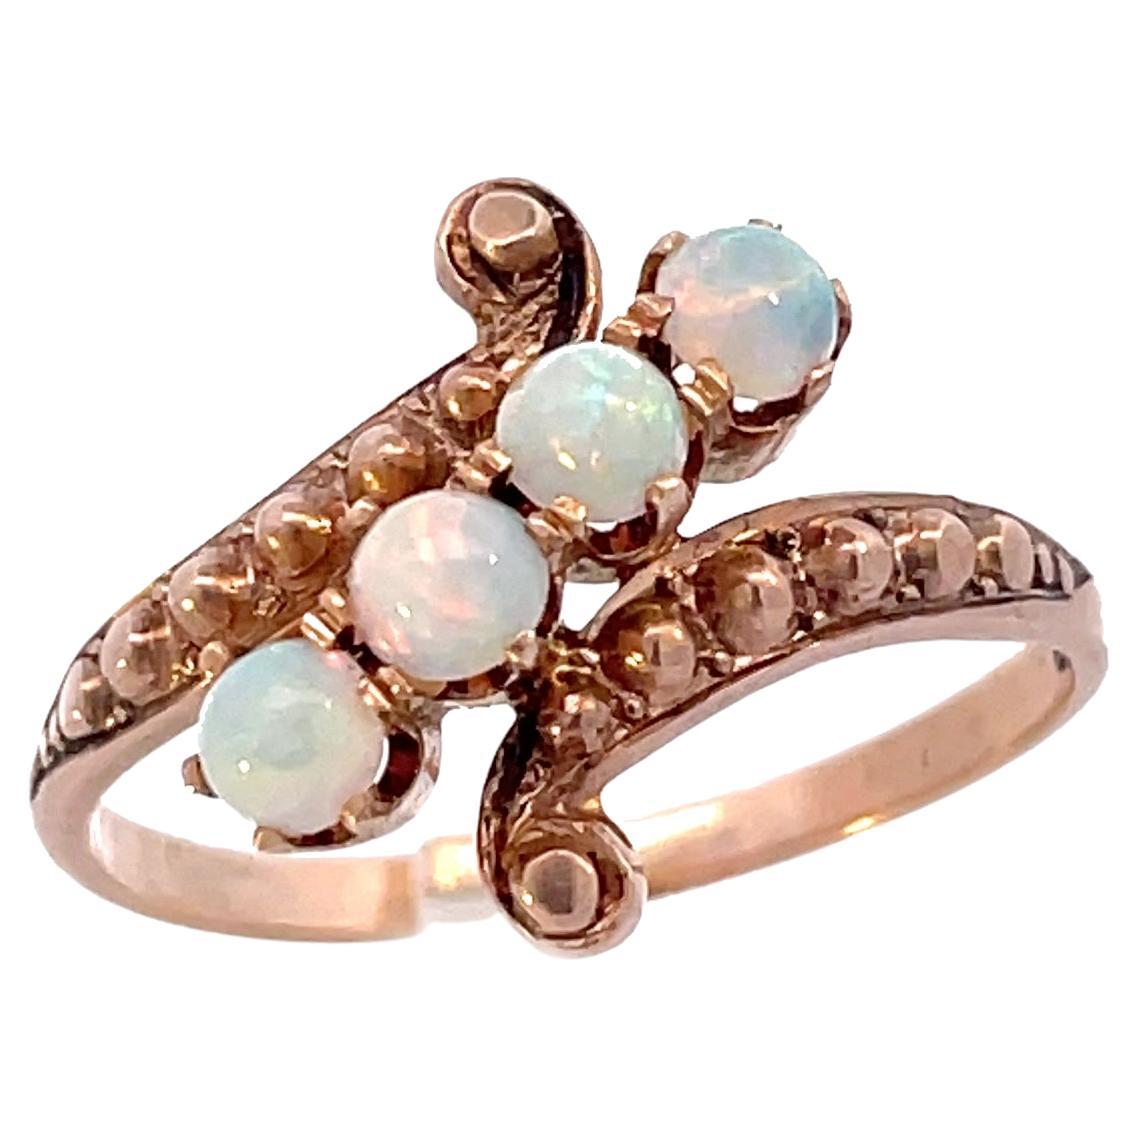 1890 Victorian 14K Yellow Gold White Opal Ring